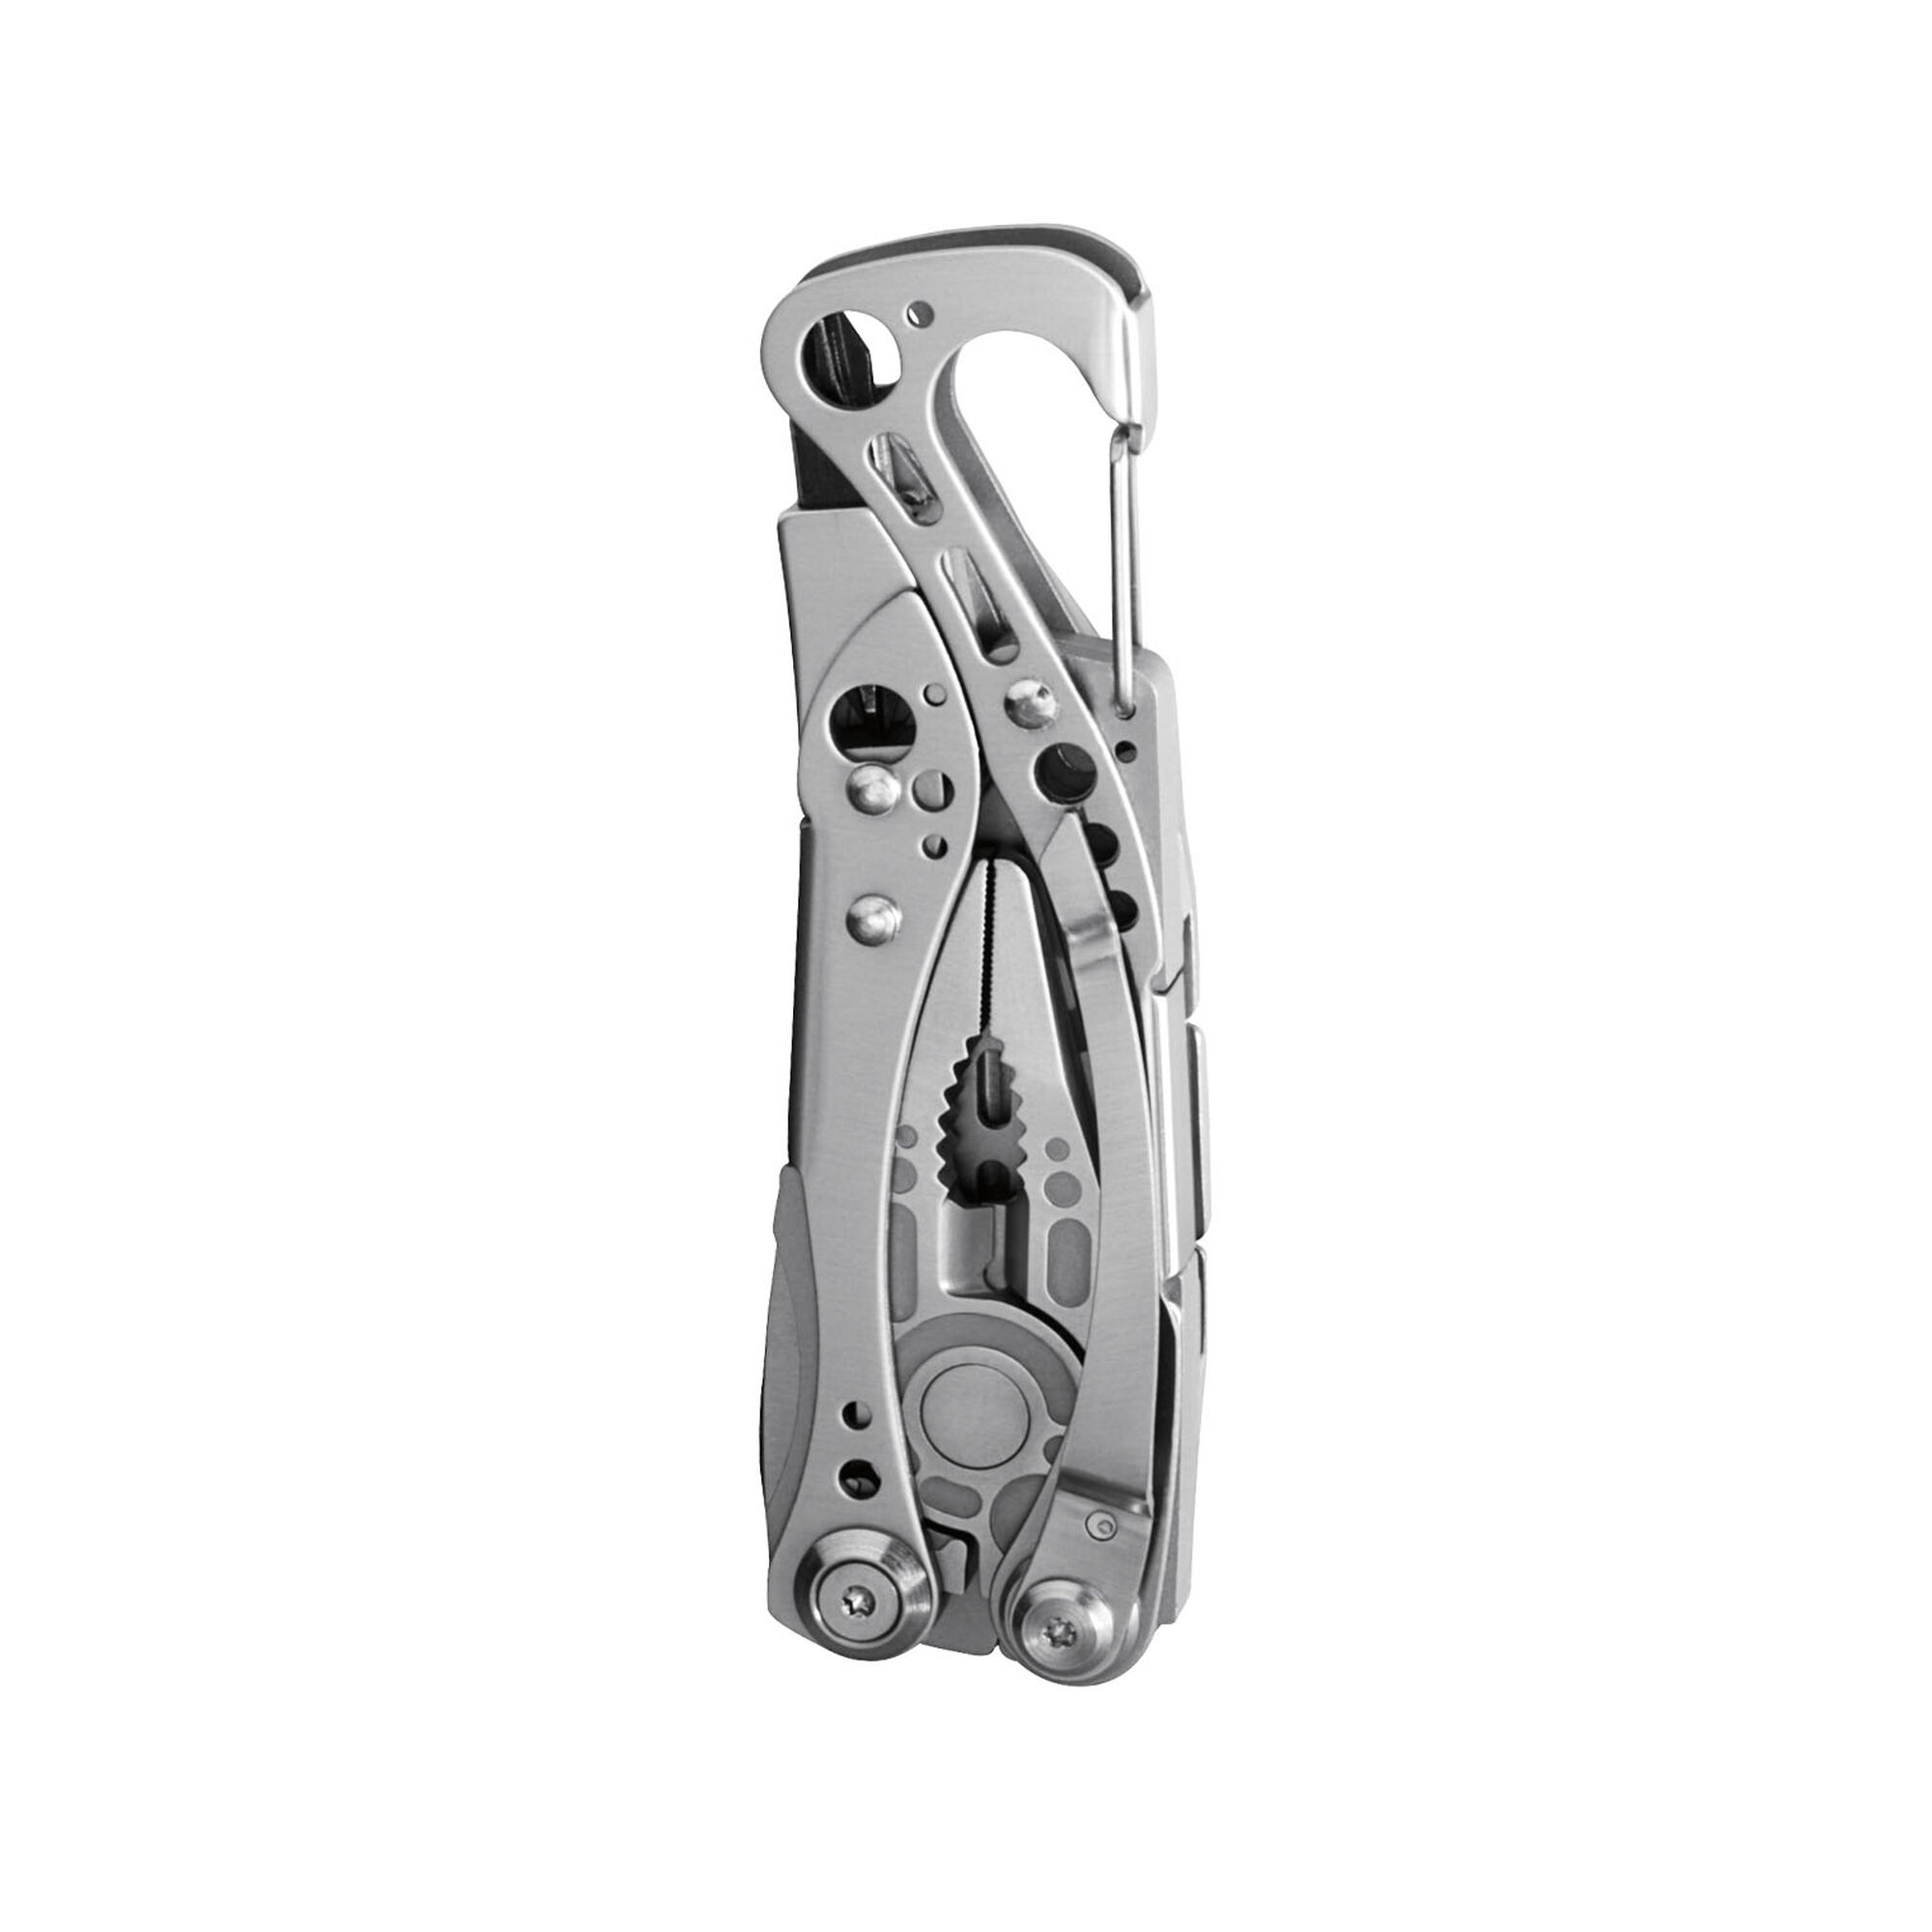 LEATHERMAN, Skeletool, 7-in-1 Lightweight, Minimalist Multi-tool for  Everyday Carry (EDC), Home, Garden & Outdoors, Stainless Steel